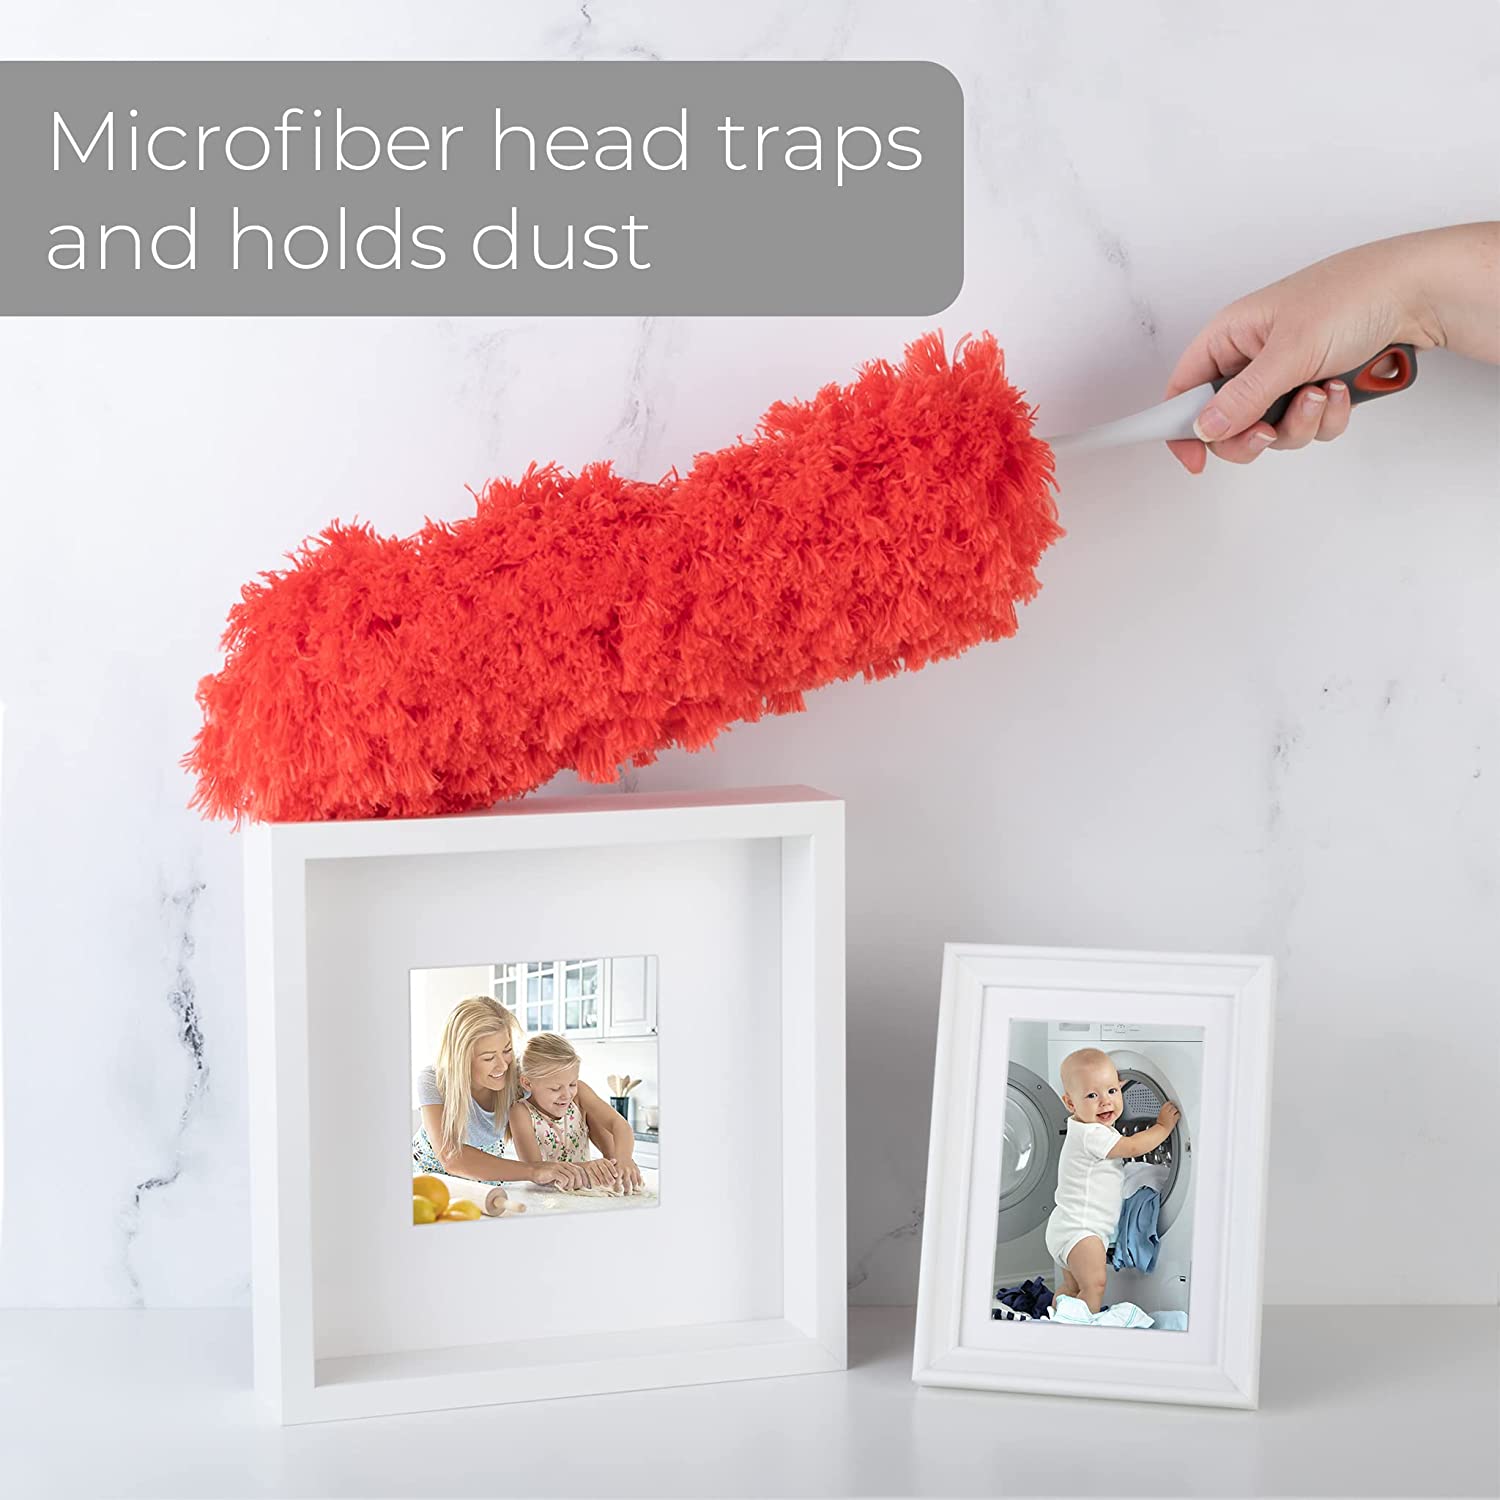 OXO's Microfiber Under Appliance Duster Is Perfect for Cleaning